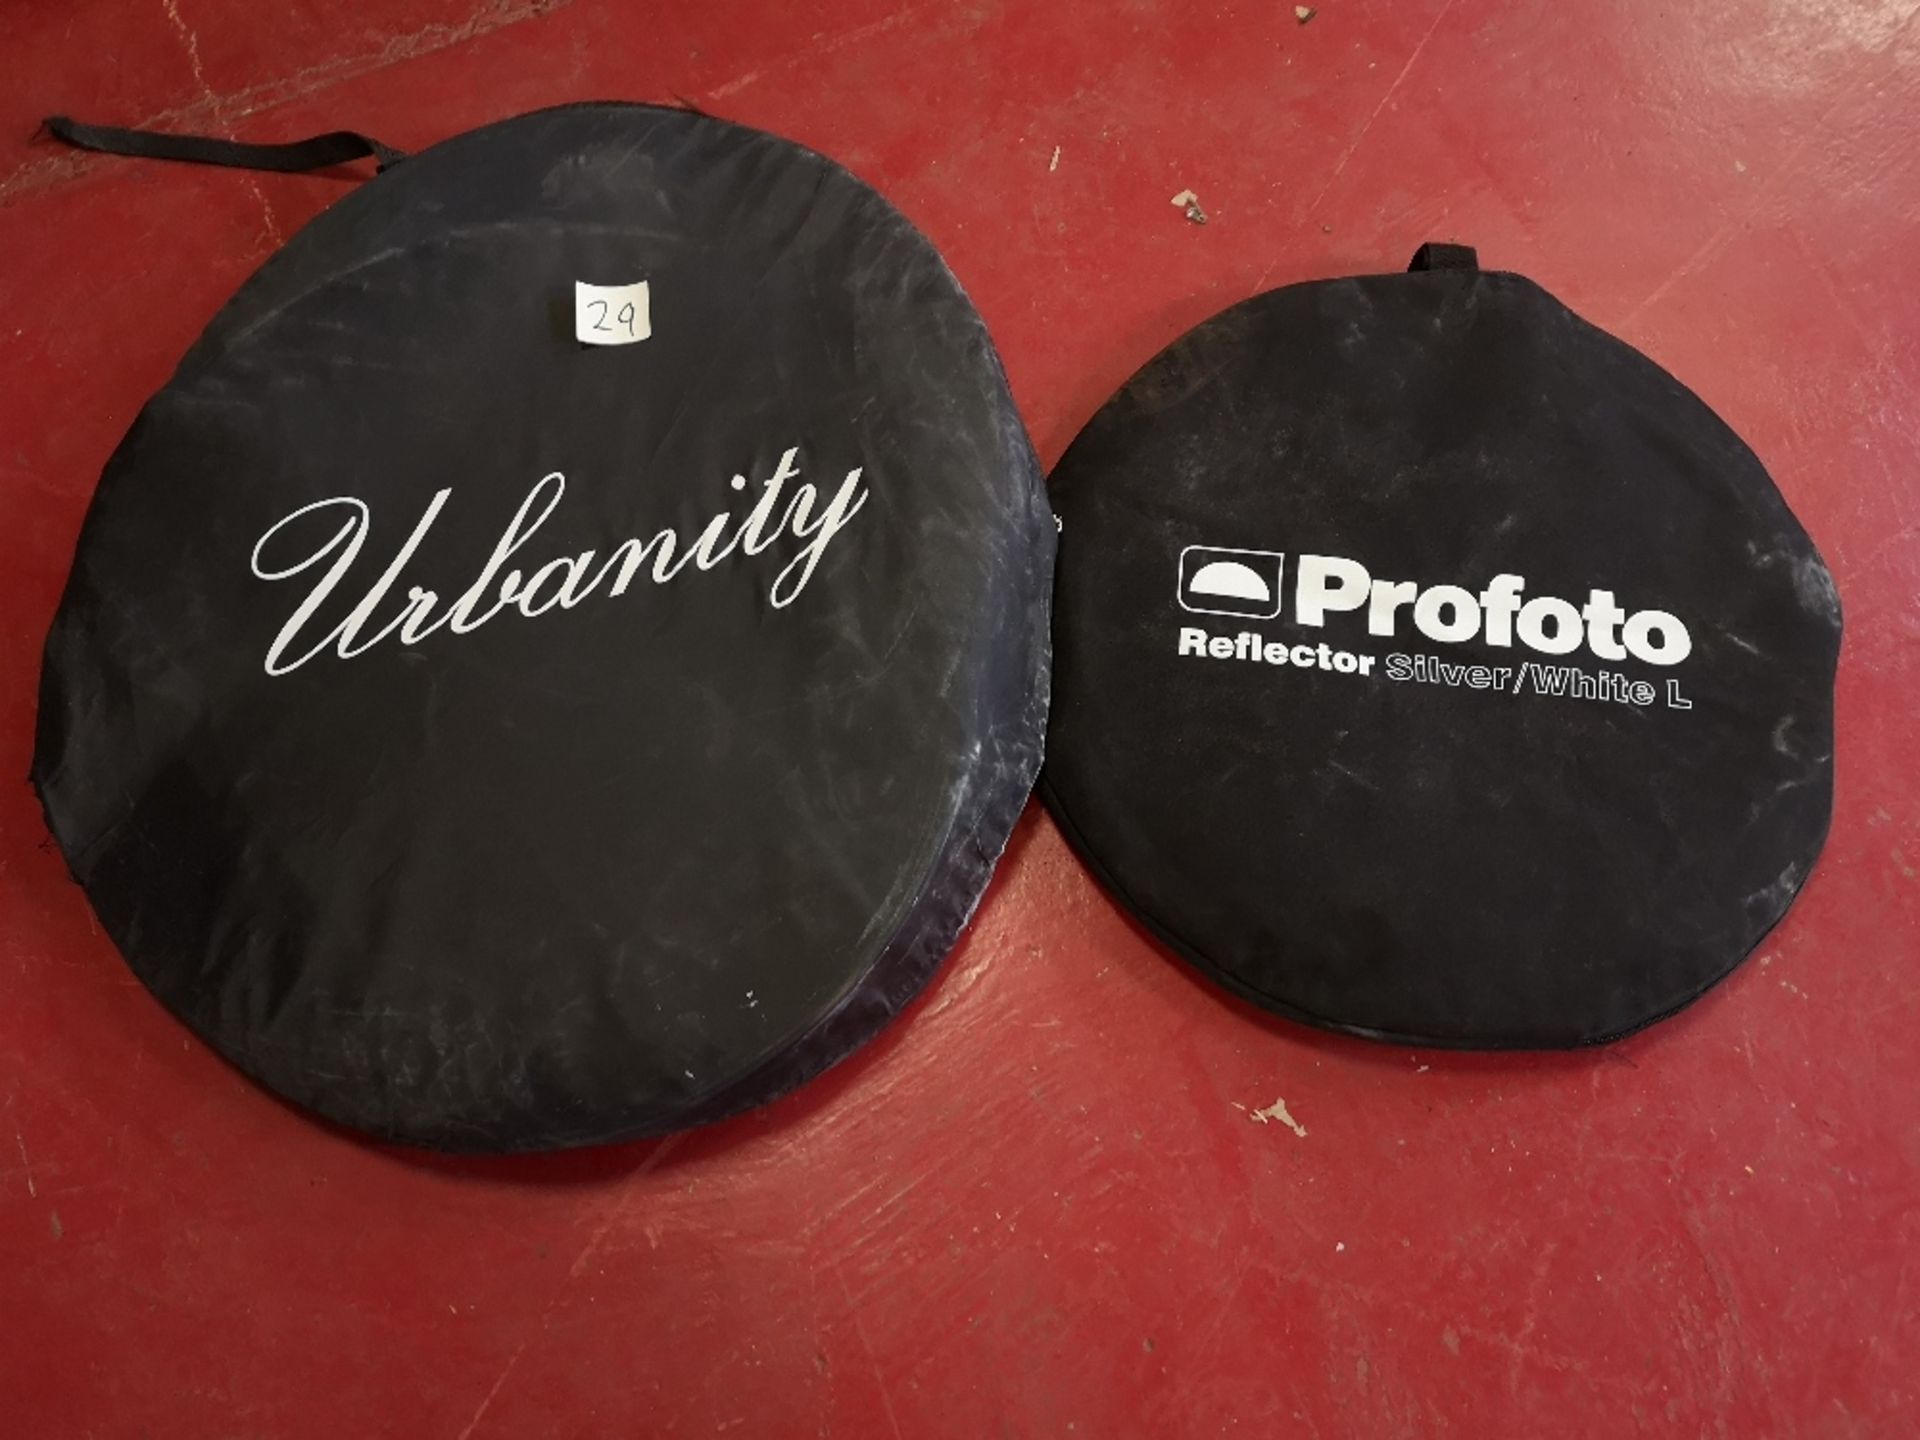 Prophoto and Urbanity Collapsible Photography Reflectors